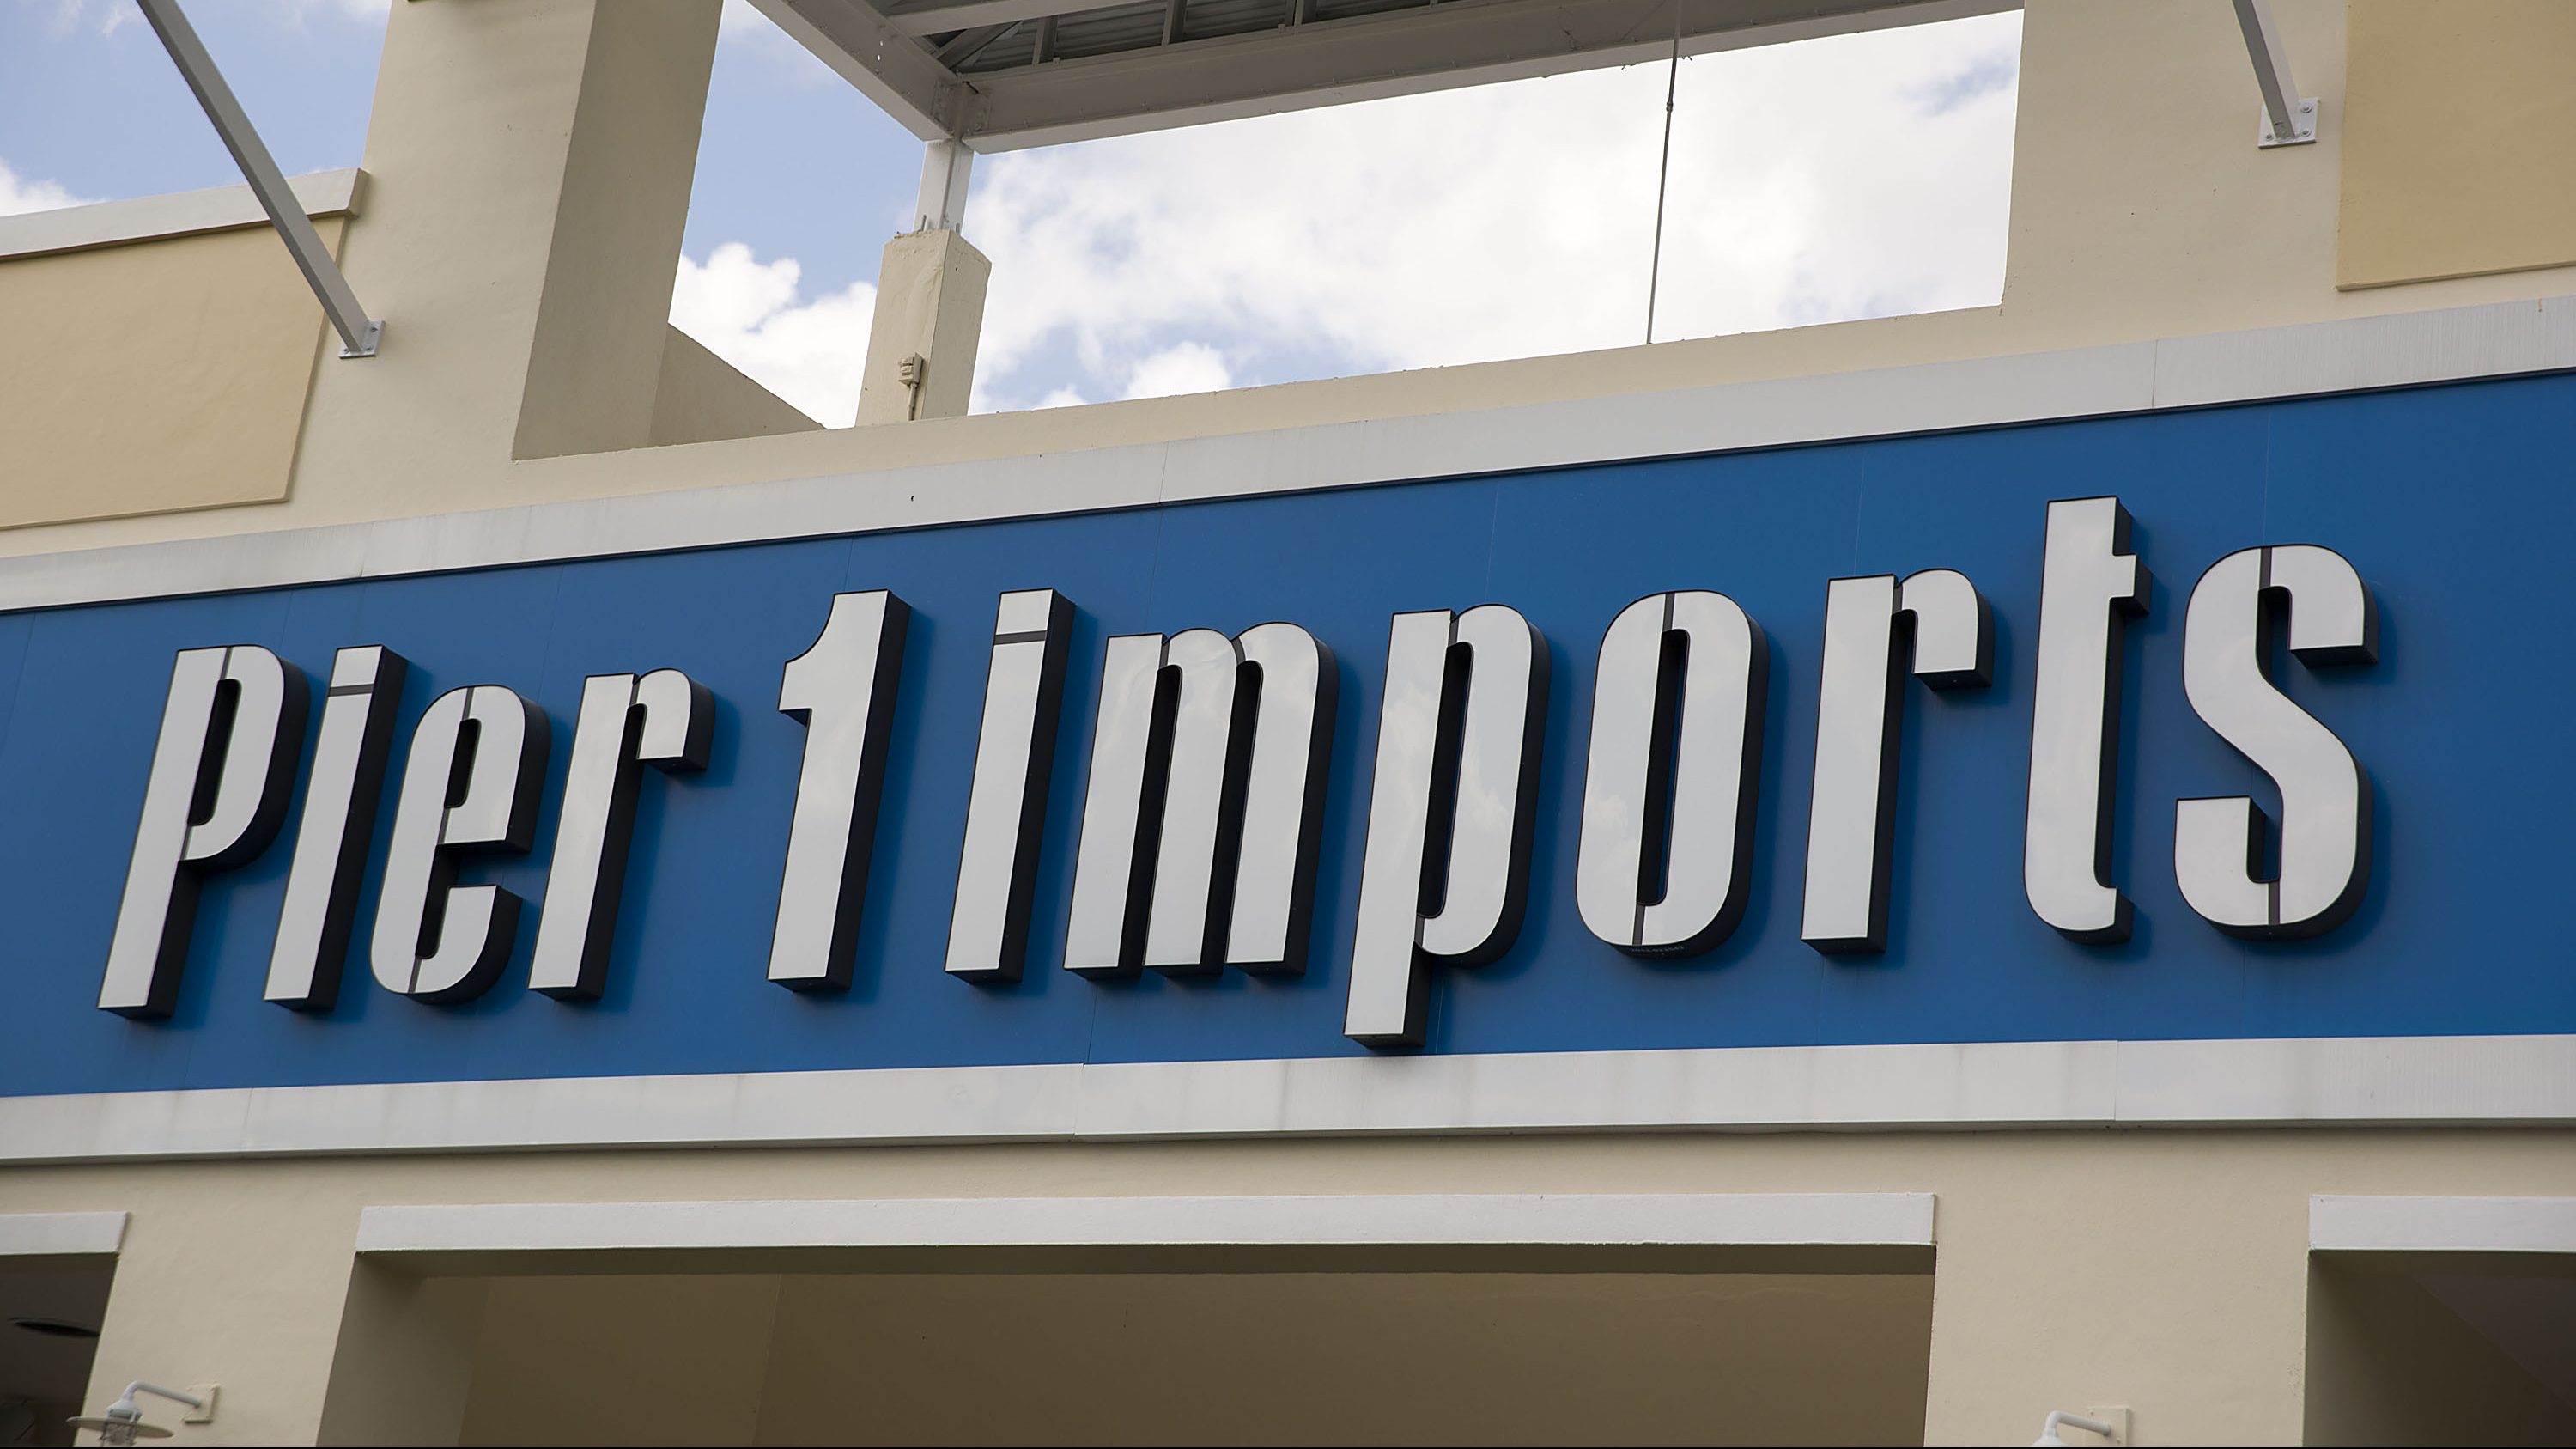 Pier 1 Imports Considers Closing 15 Percent Of Its Stores After Disappointing 4th Quarter